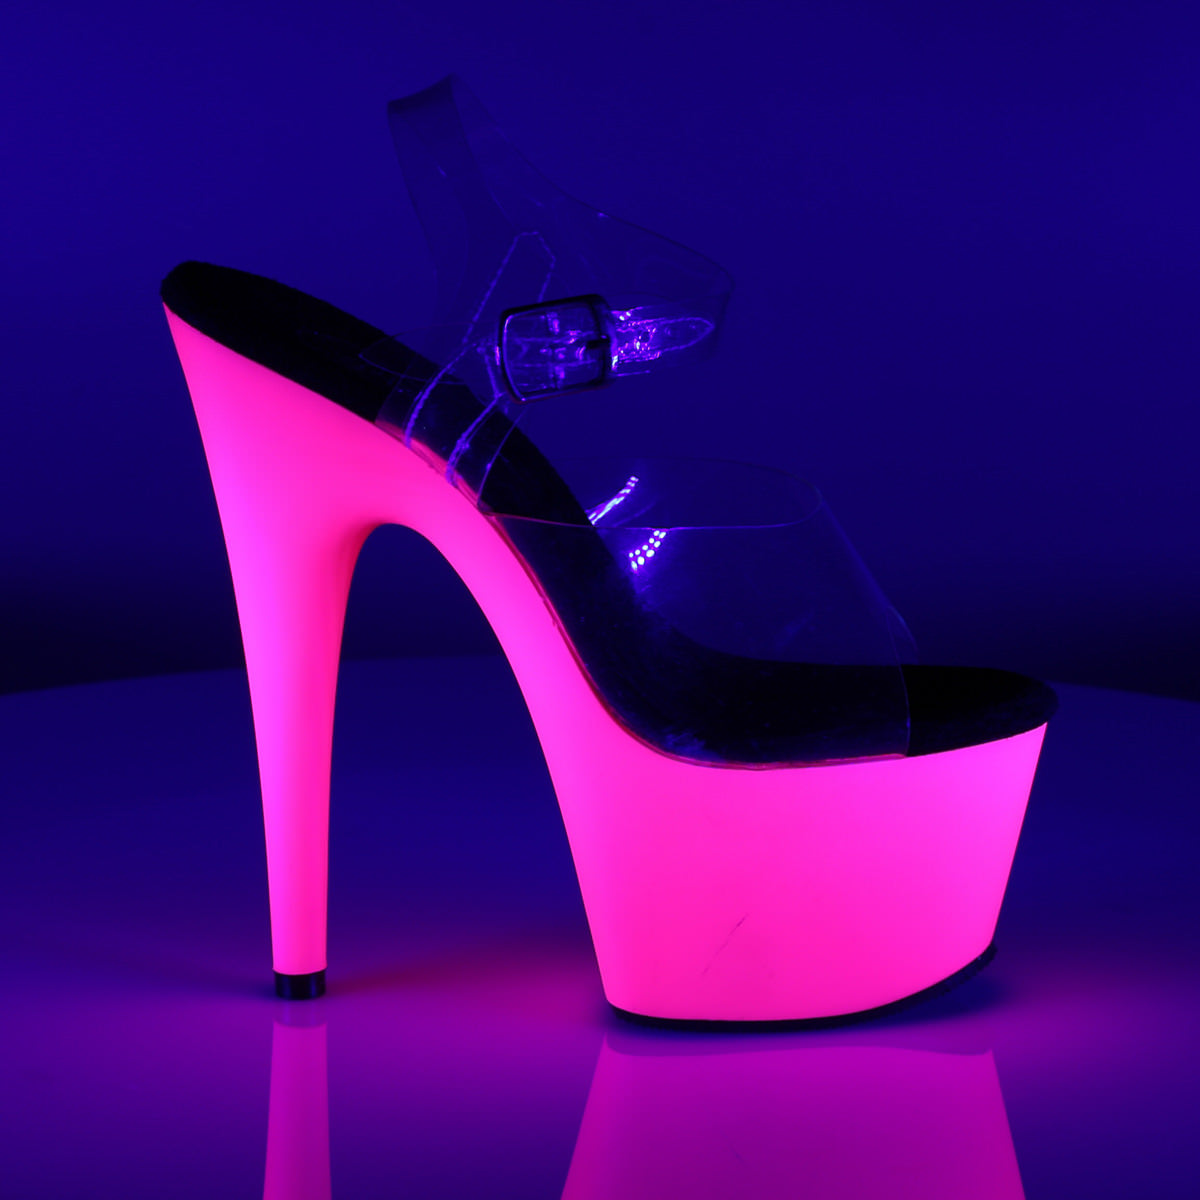 7 Inch ADORE-708UV Clear-Neon Pink